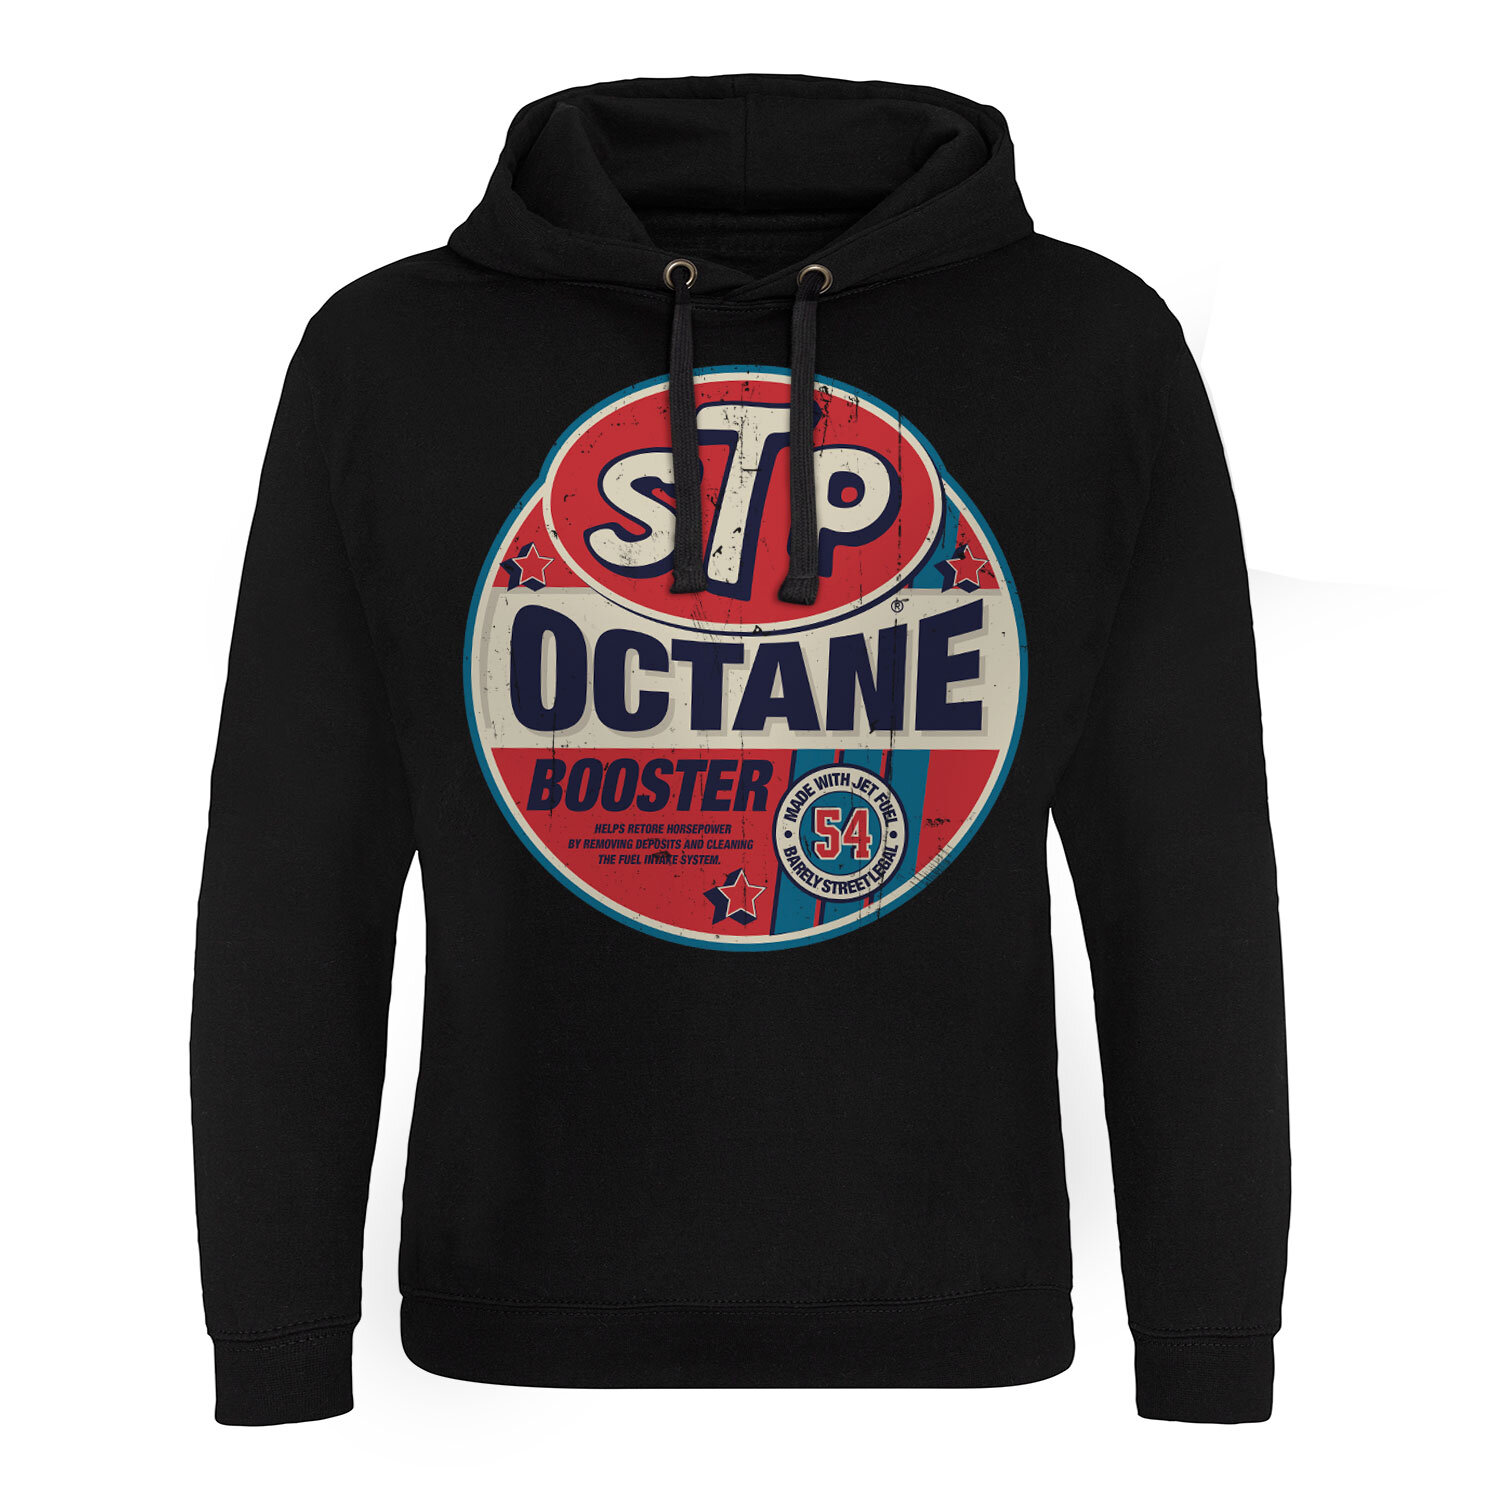 STP Octane Booster Epic Hoodie